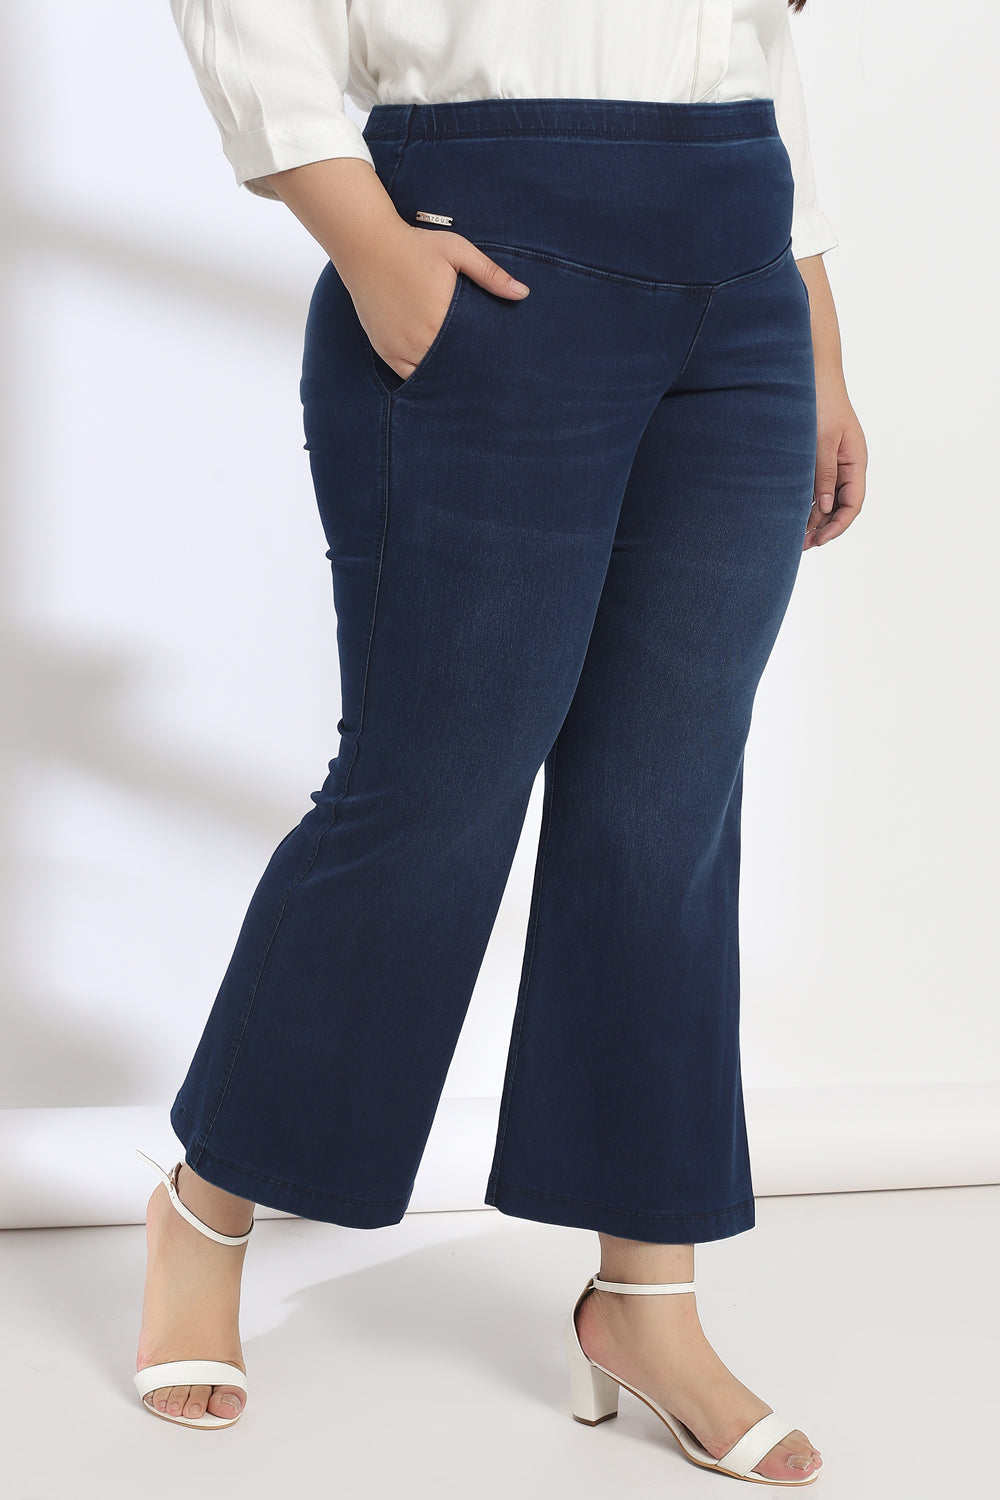 Navy Blue Light Fade Flare Jeans